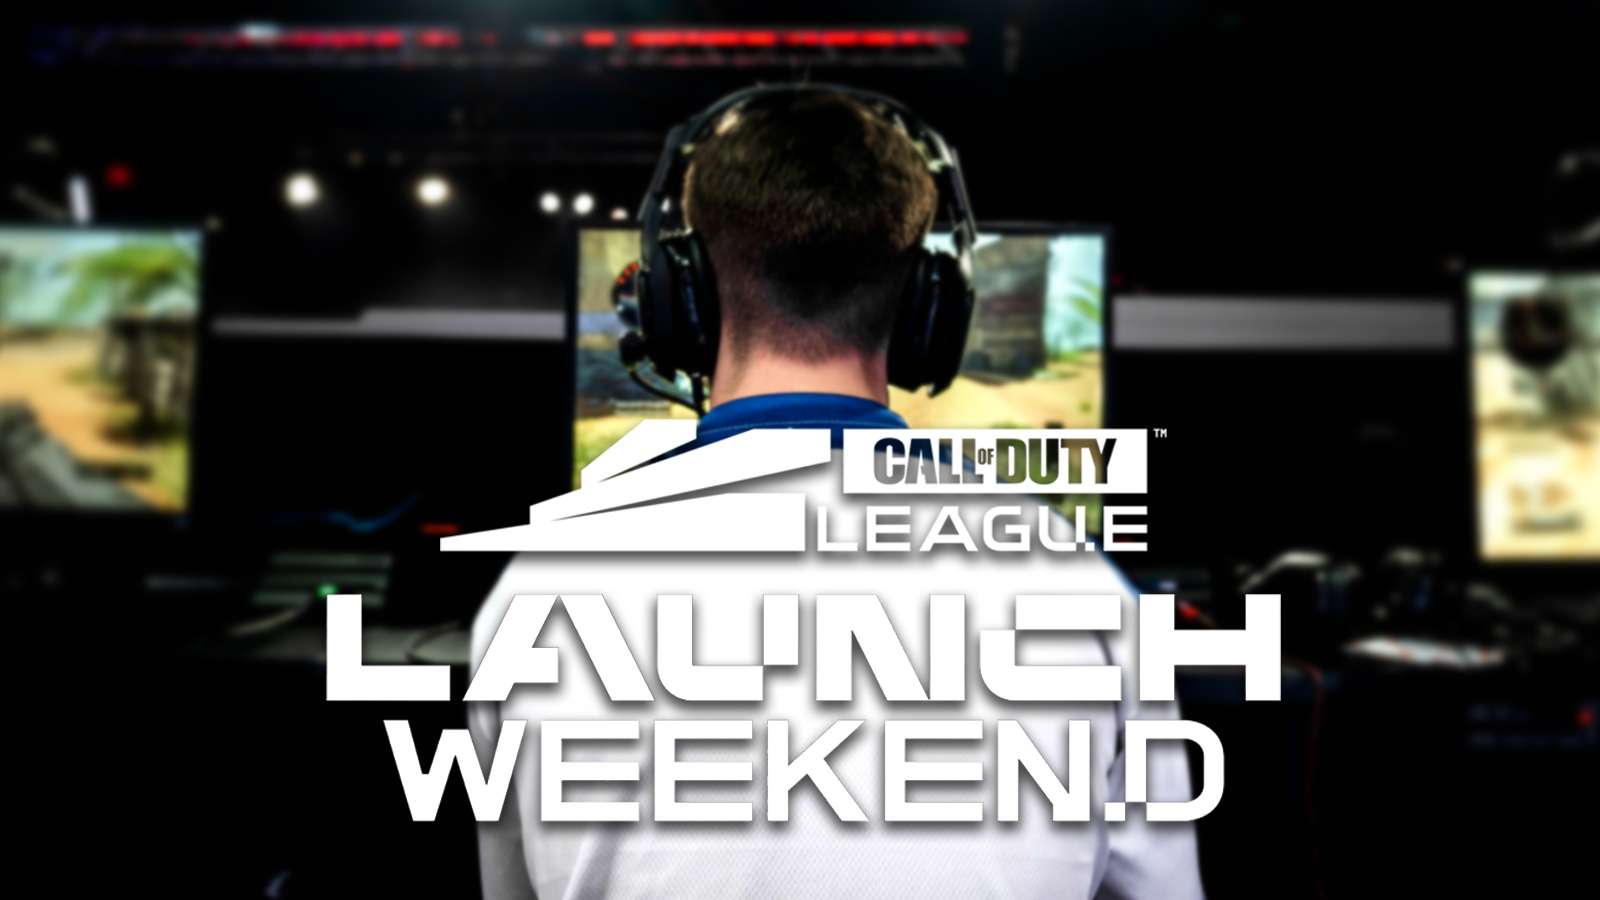 Players to watch during the Call of Duty League Launch Weekend